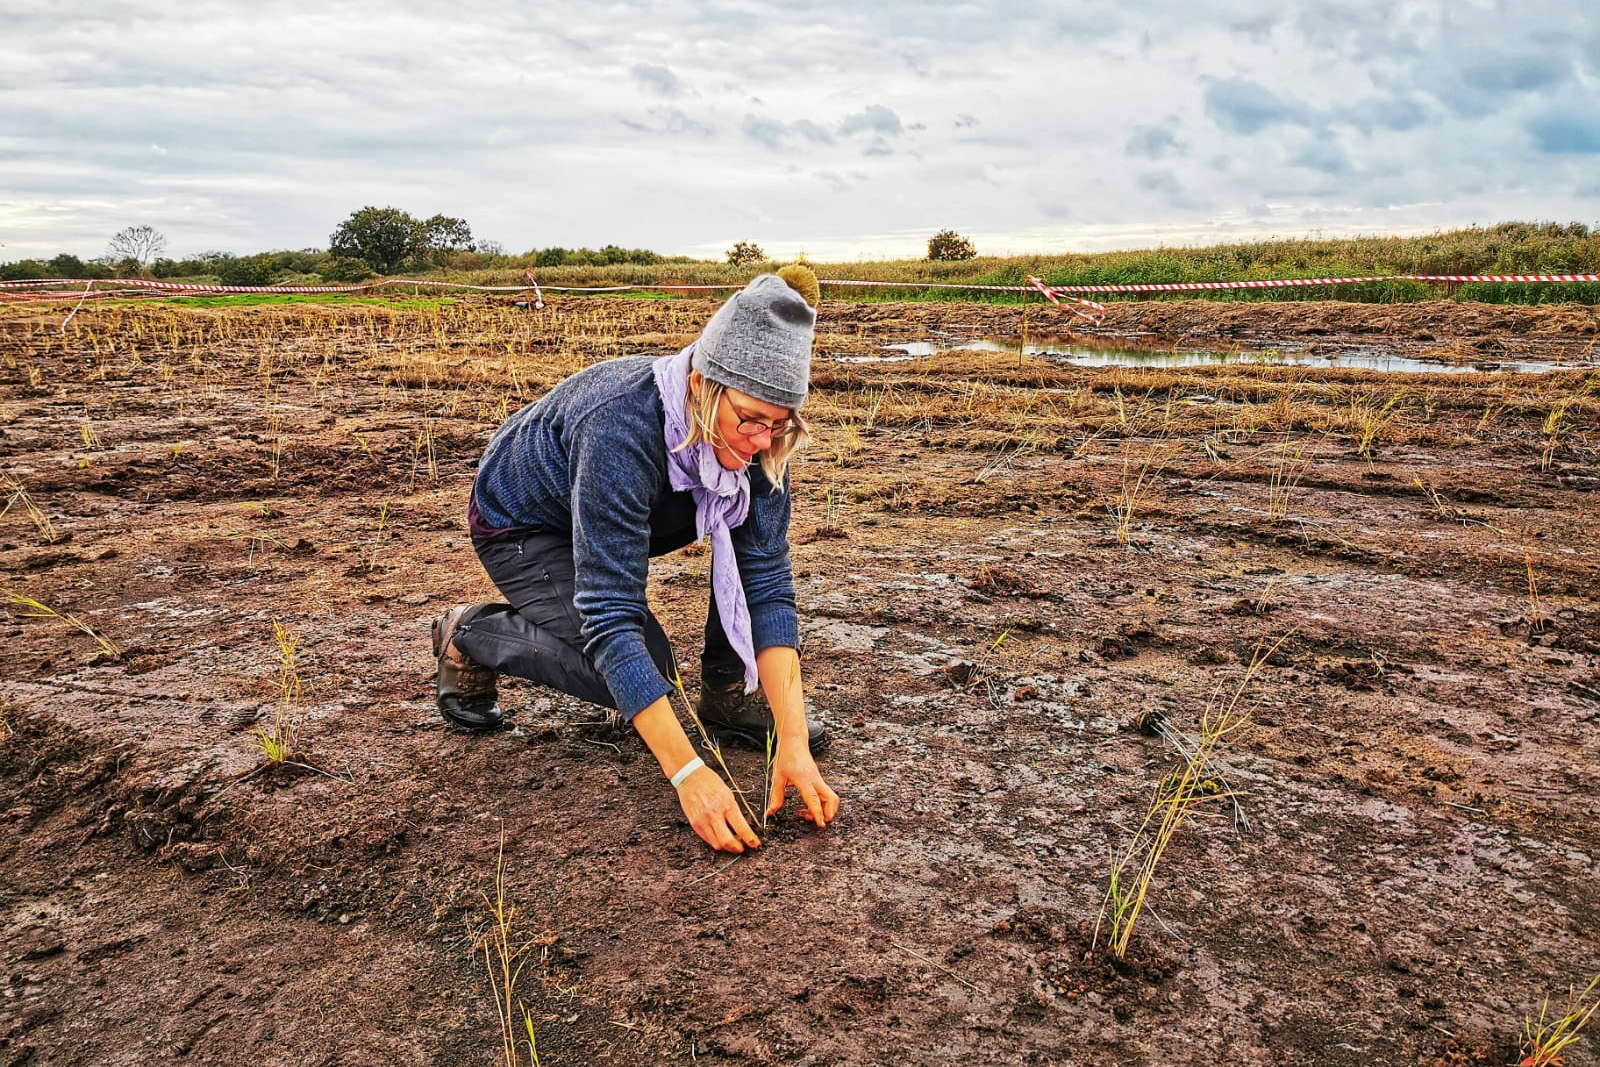 Broads ecologist Andrea Kelly inspecting peat at wetland farming site